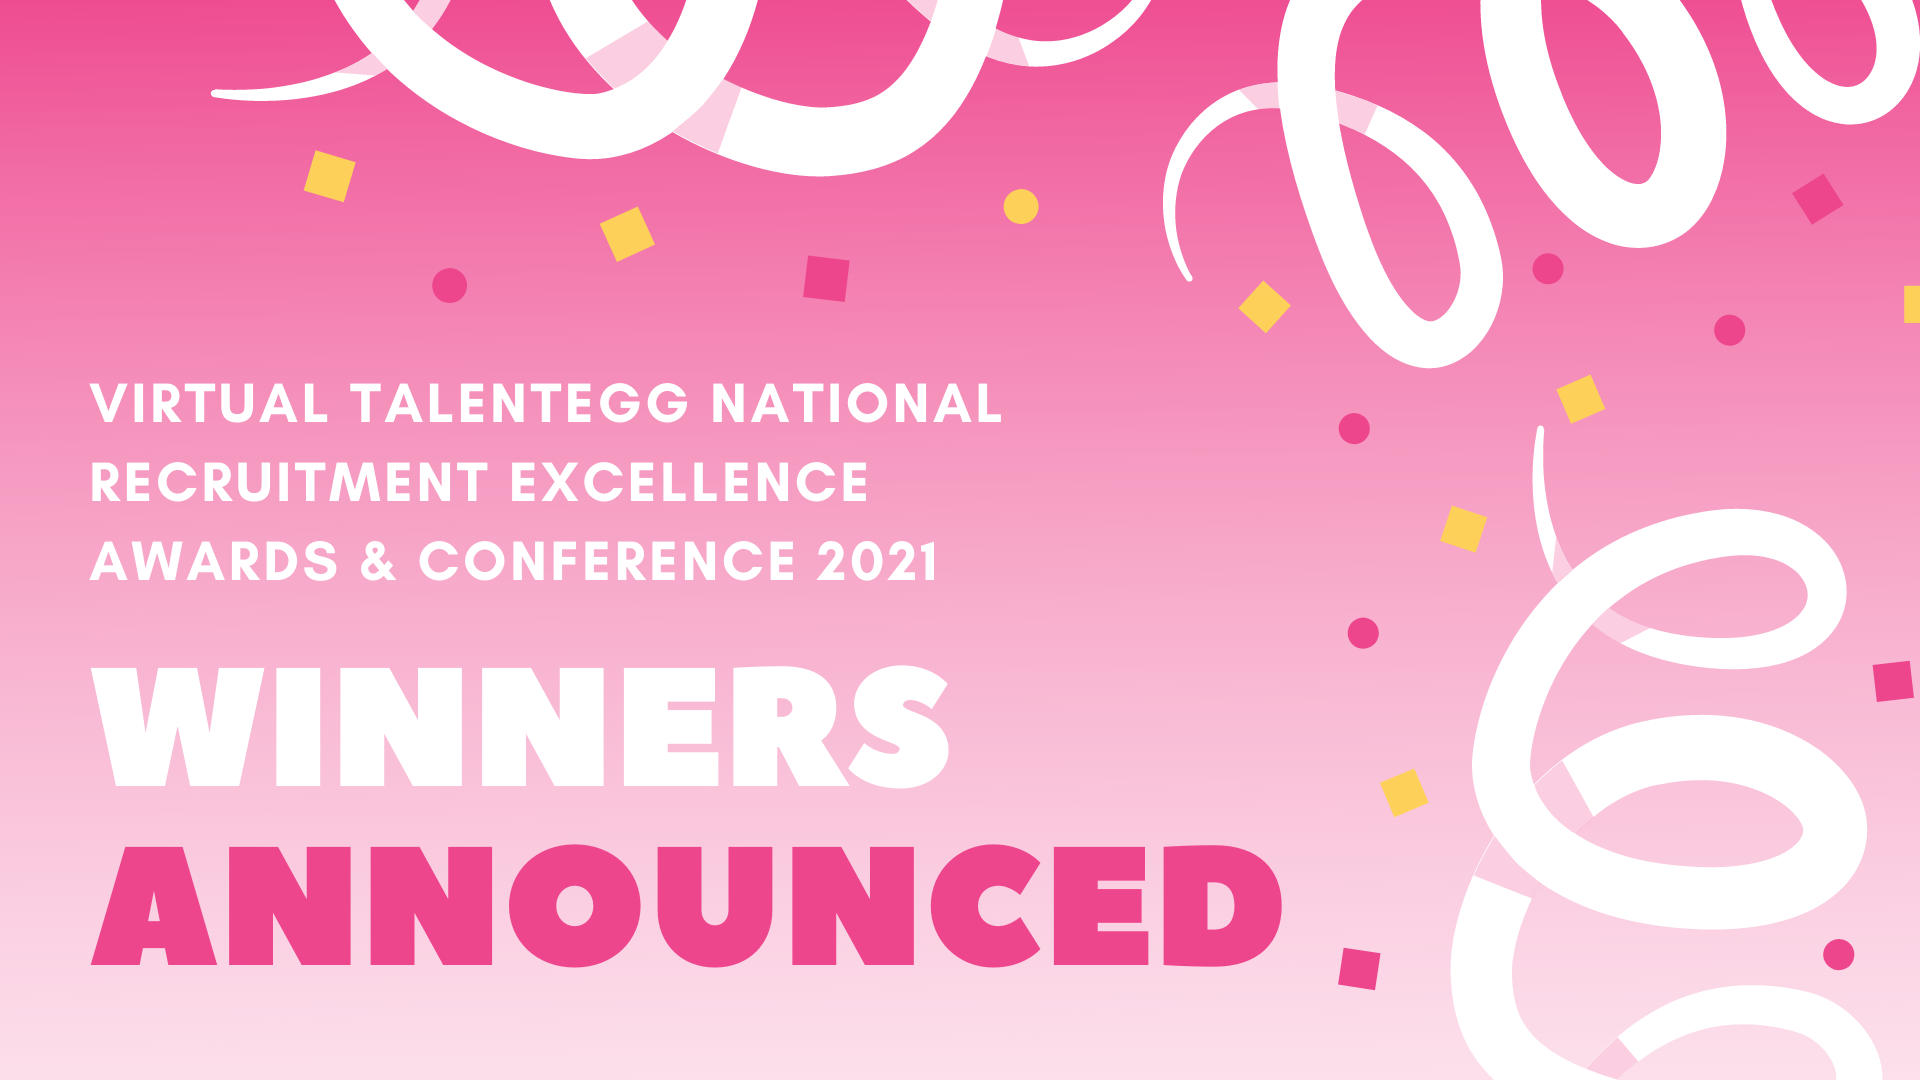 Congratulations to the Winners of the 2021 TalentEgg National Recruitment Excellence Awards and Conference! image